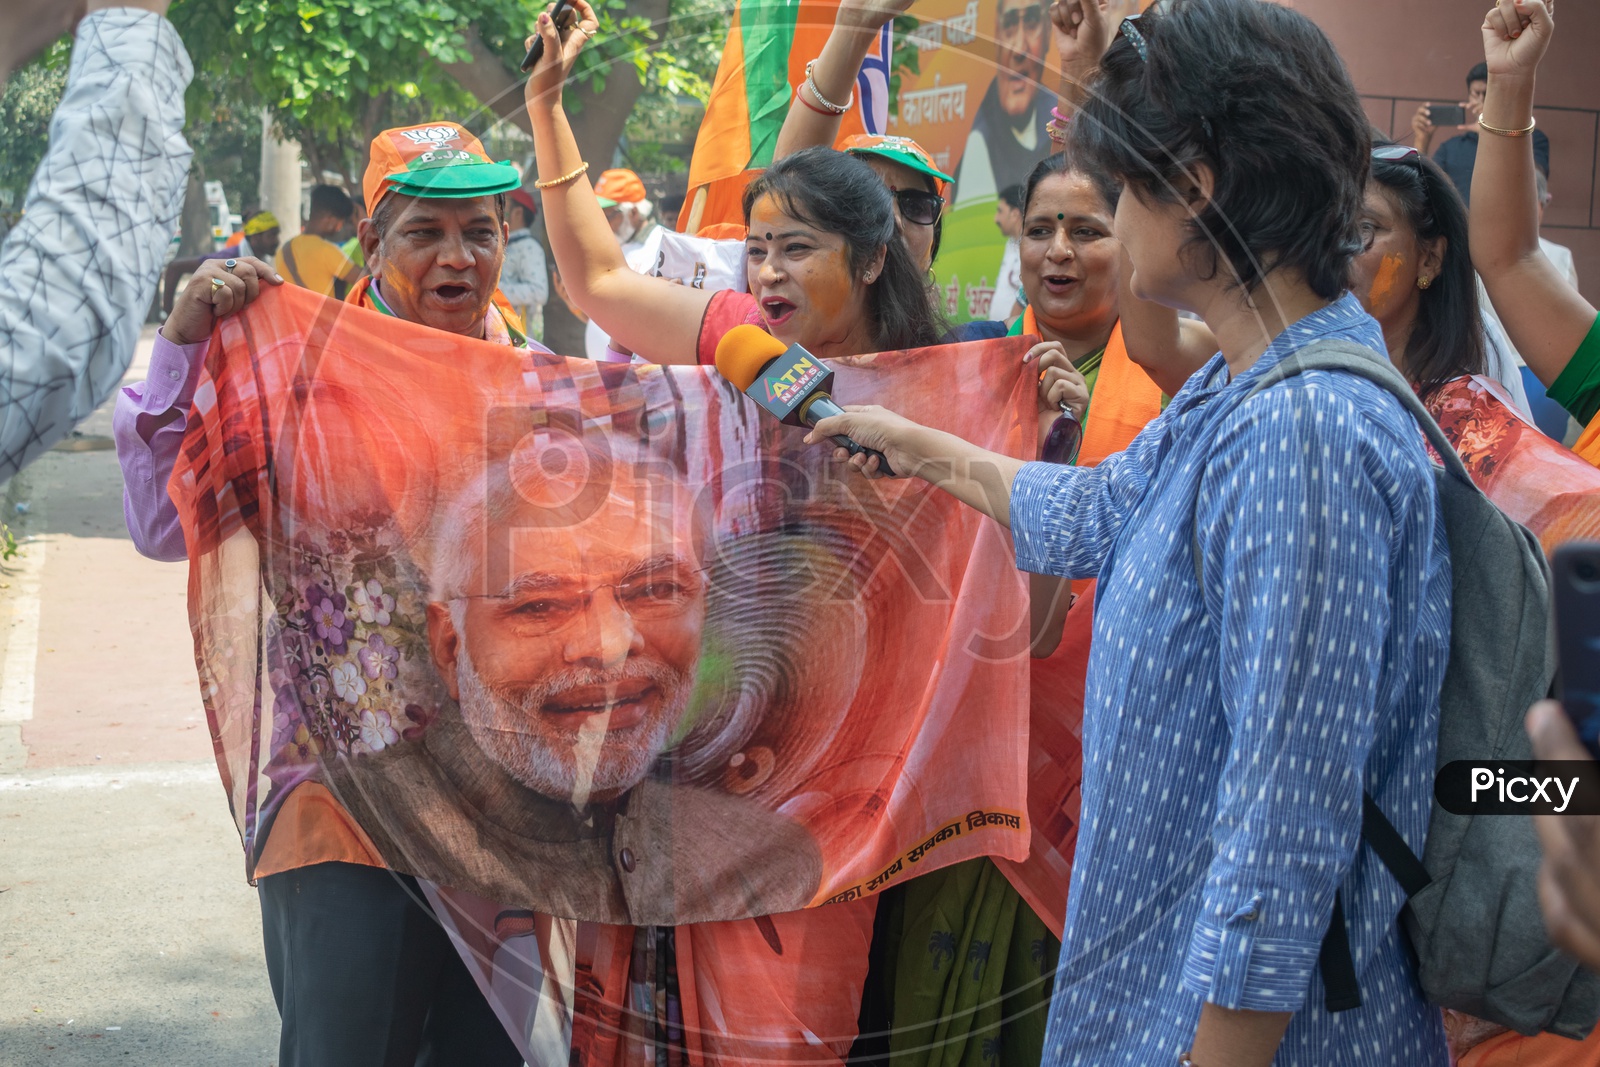 Women wearing sarees that have a picture of Narendra Modi printed on it.